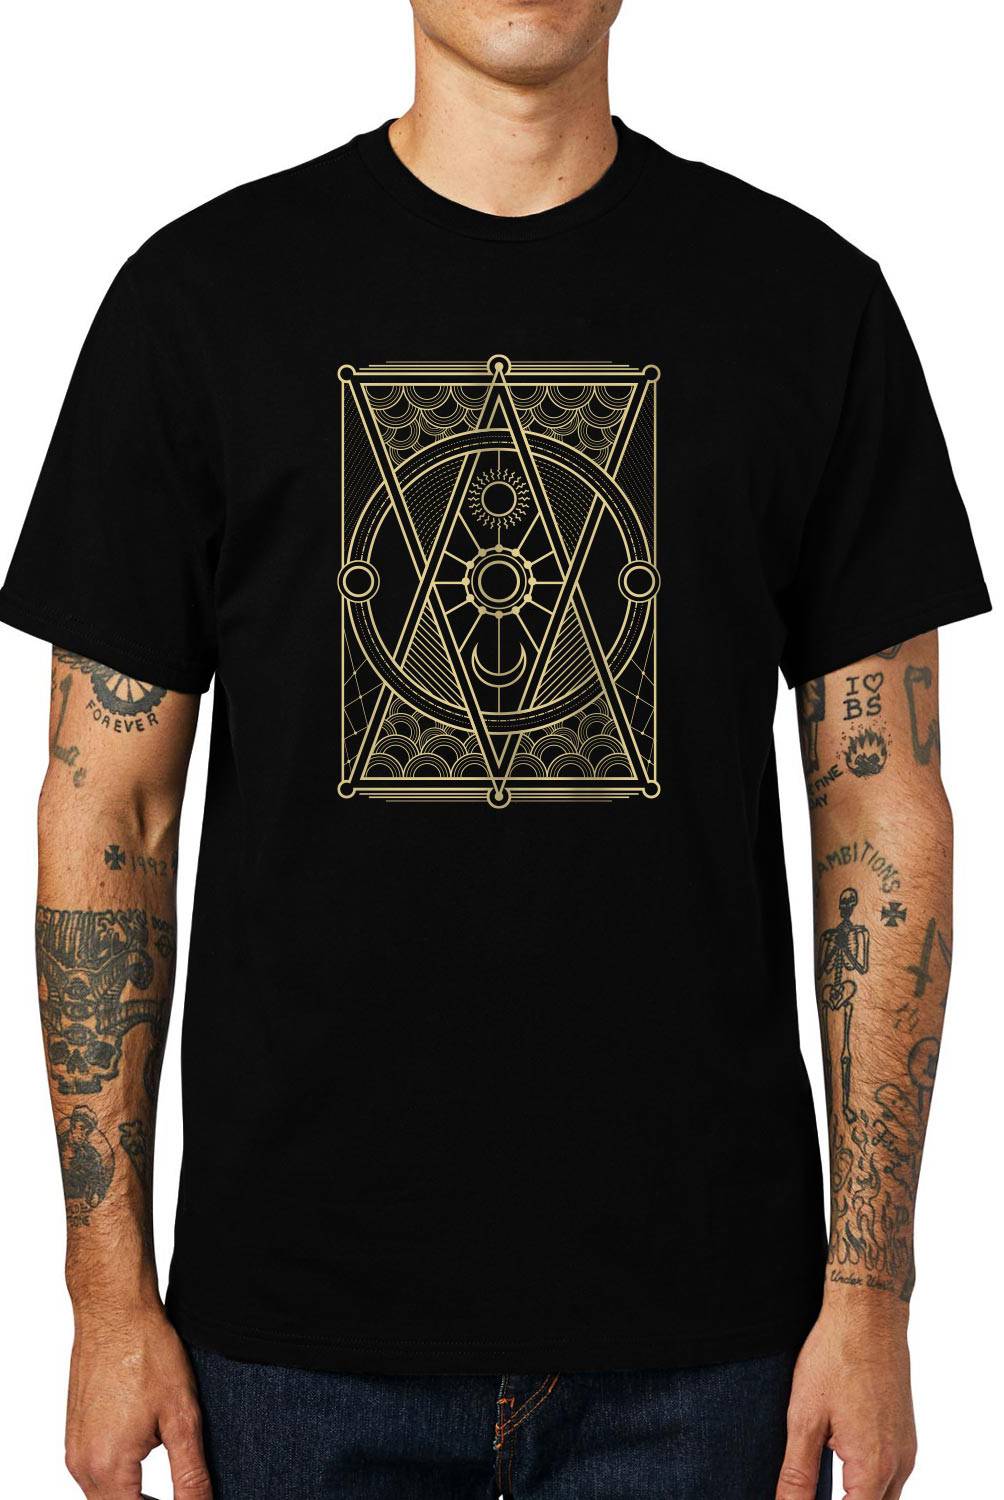 GET OUT - Polera Sun And Moon Geometry